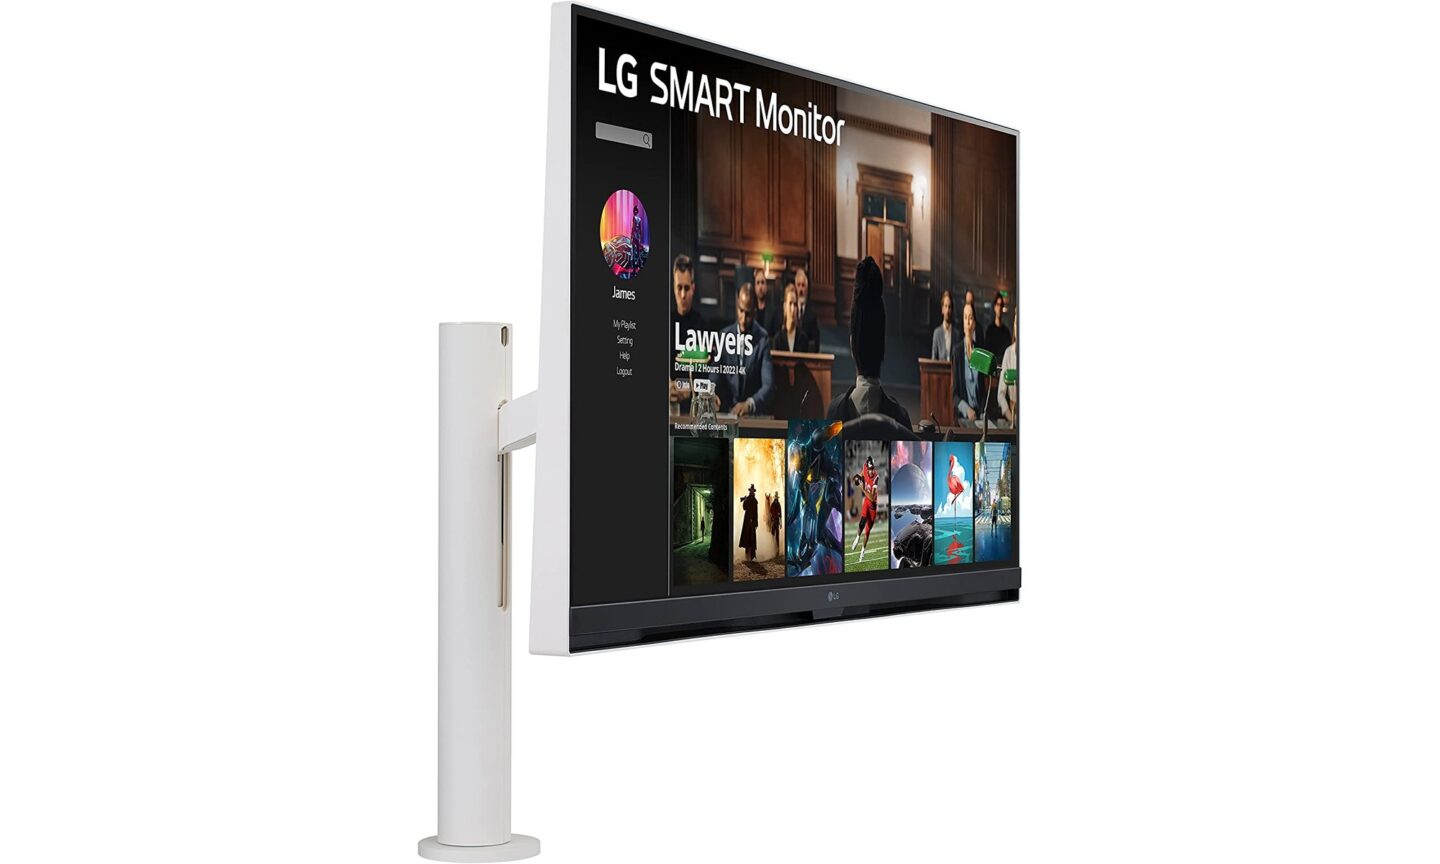 LG presented its first "smart" monitor with webOS - LG 32SQ780S